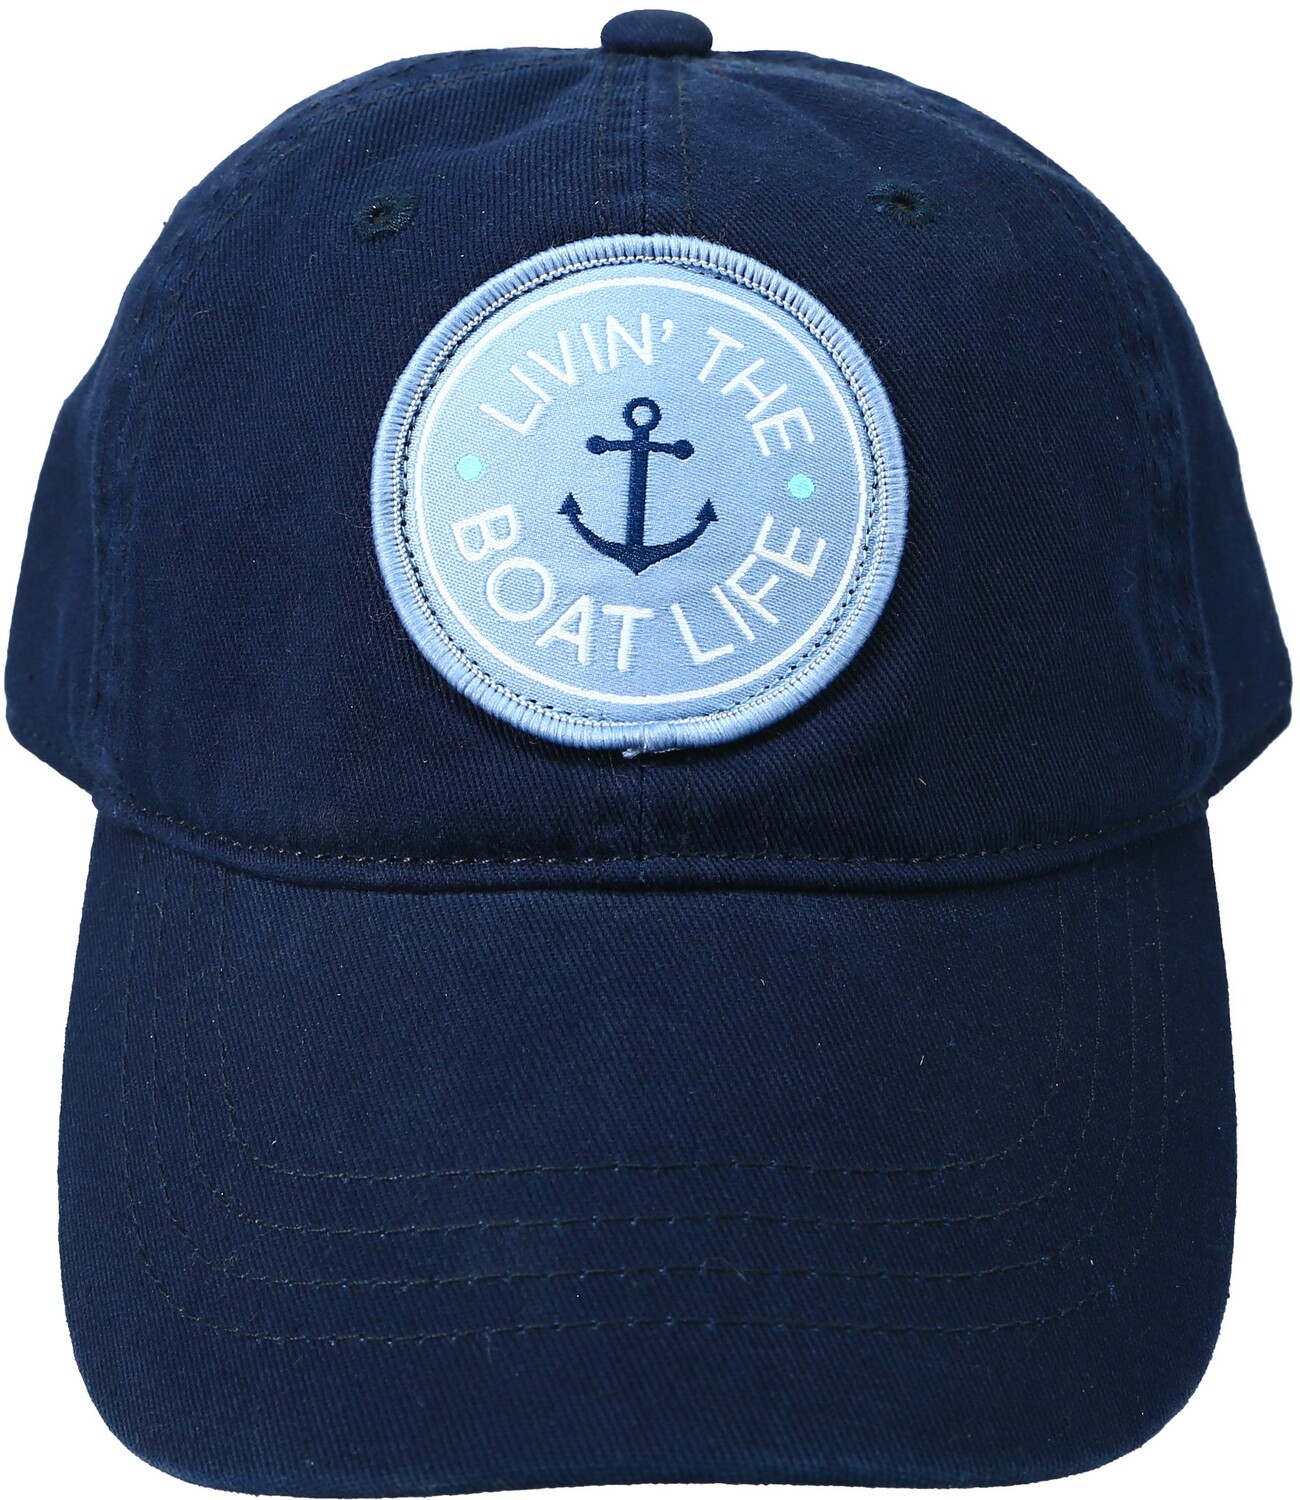 Boat Life by We People - Boat Life - Navy Adjustable Hat